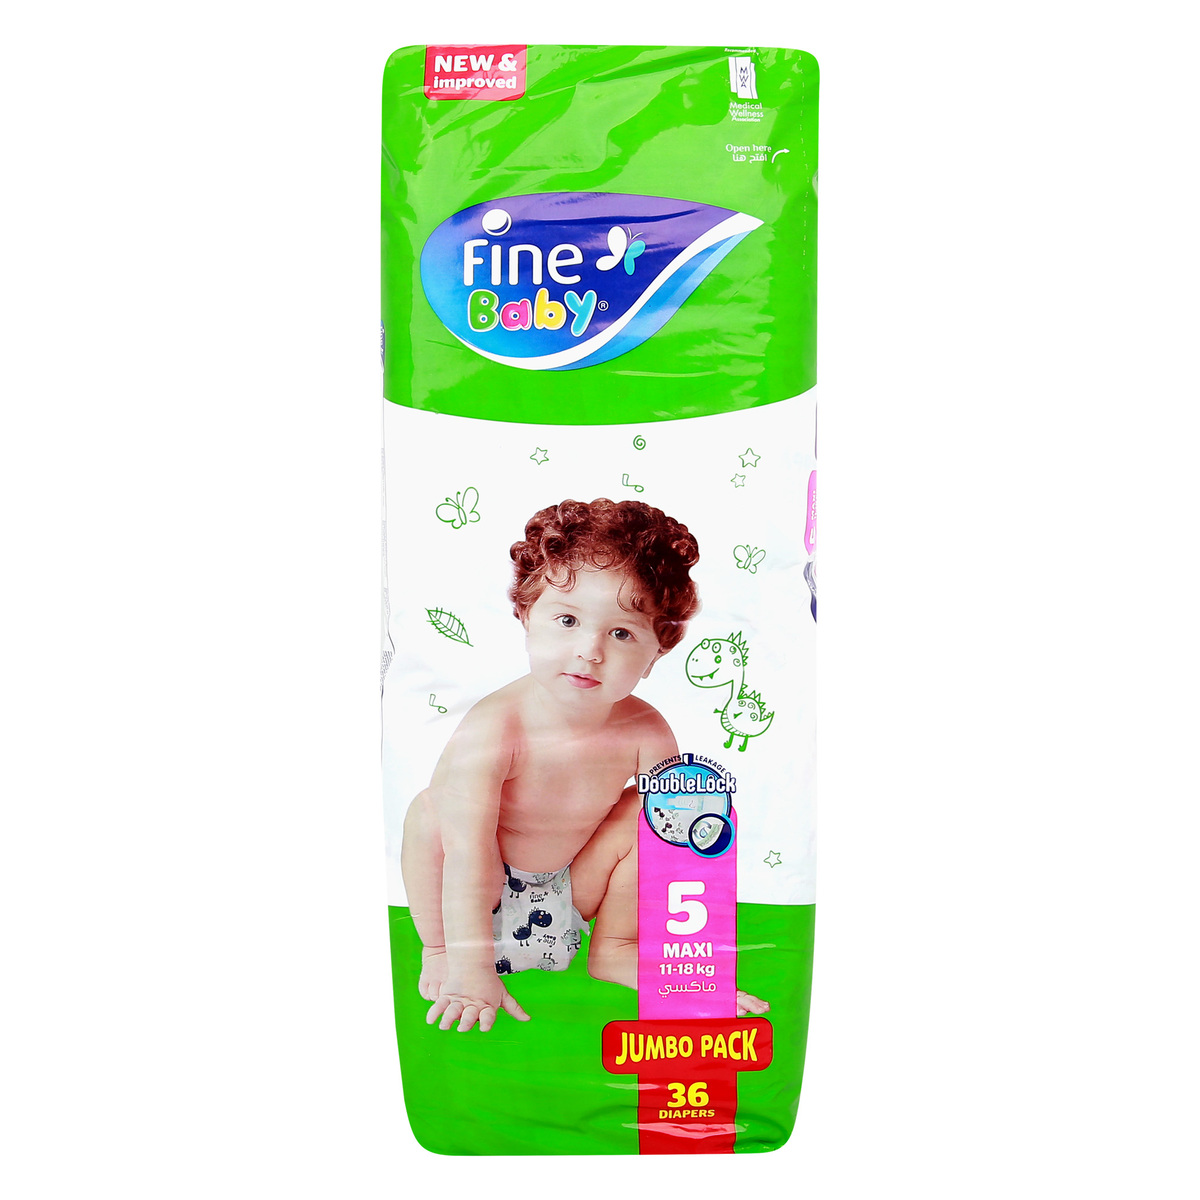 Fine Baby Baby Diapers Size 5 Maxi 11-18kg 36 pcs